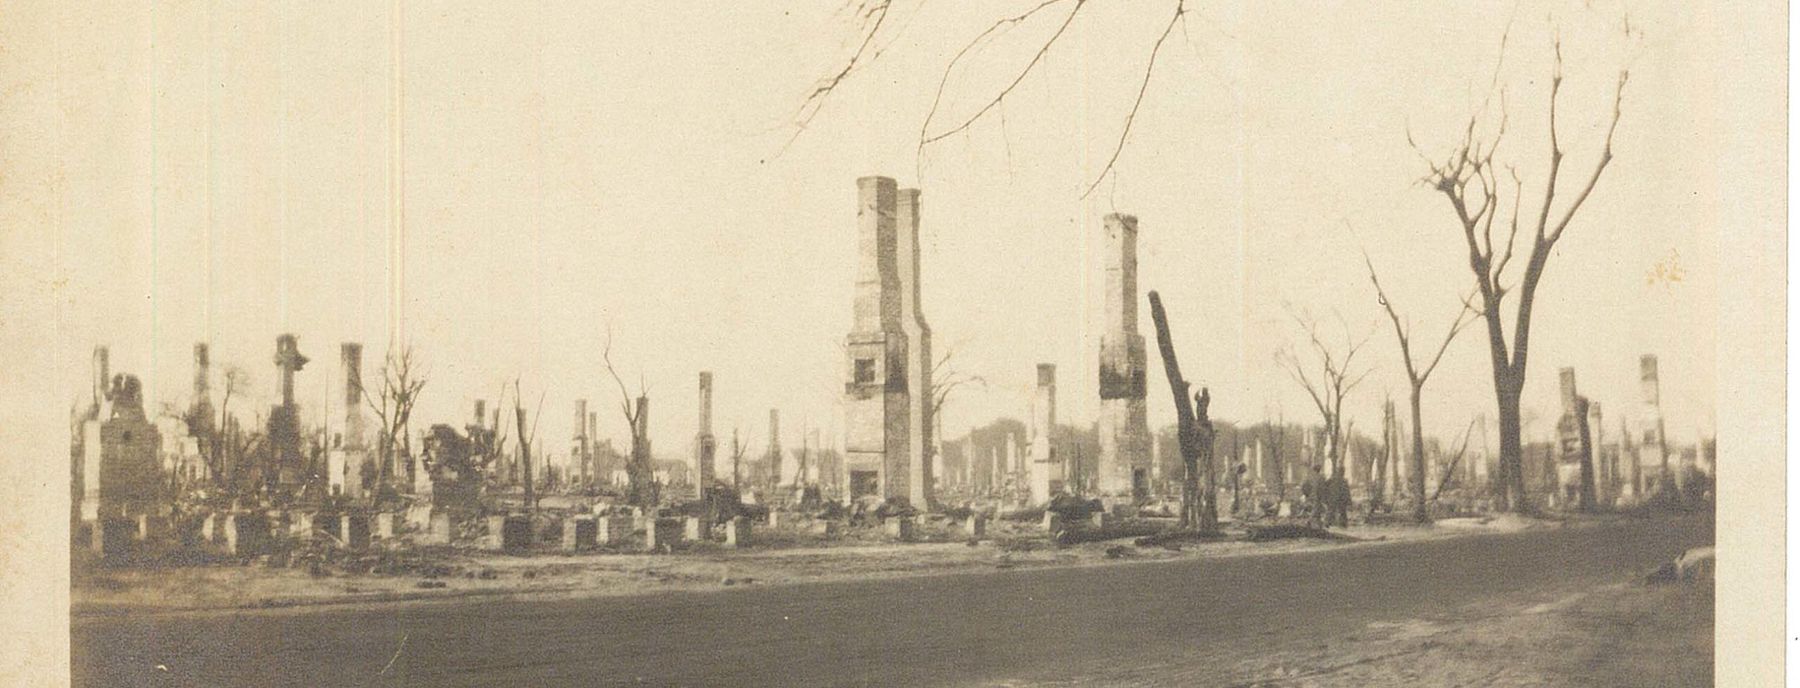 Aftermath of Great Fire